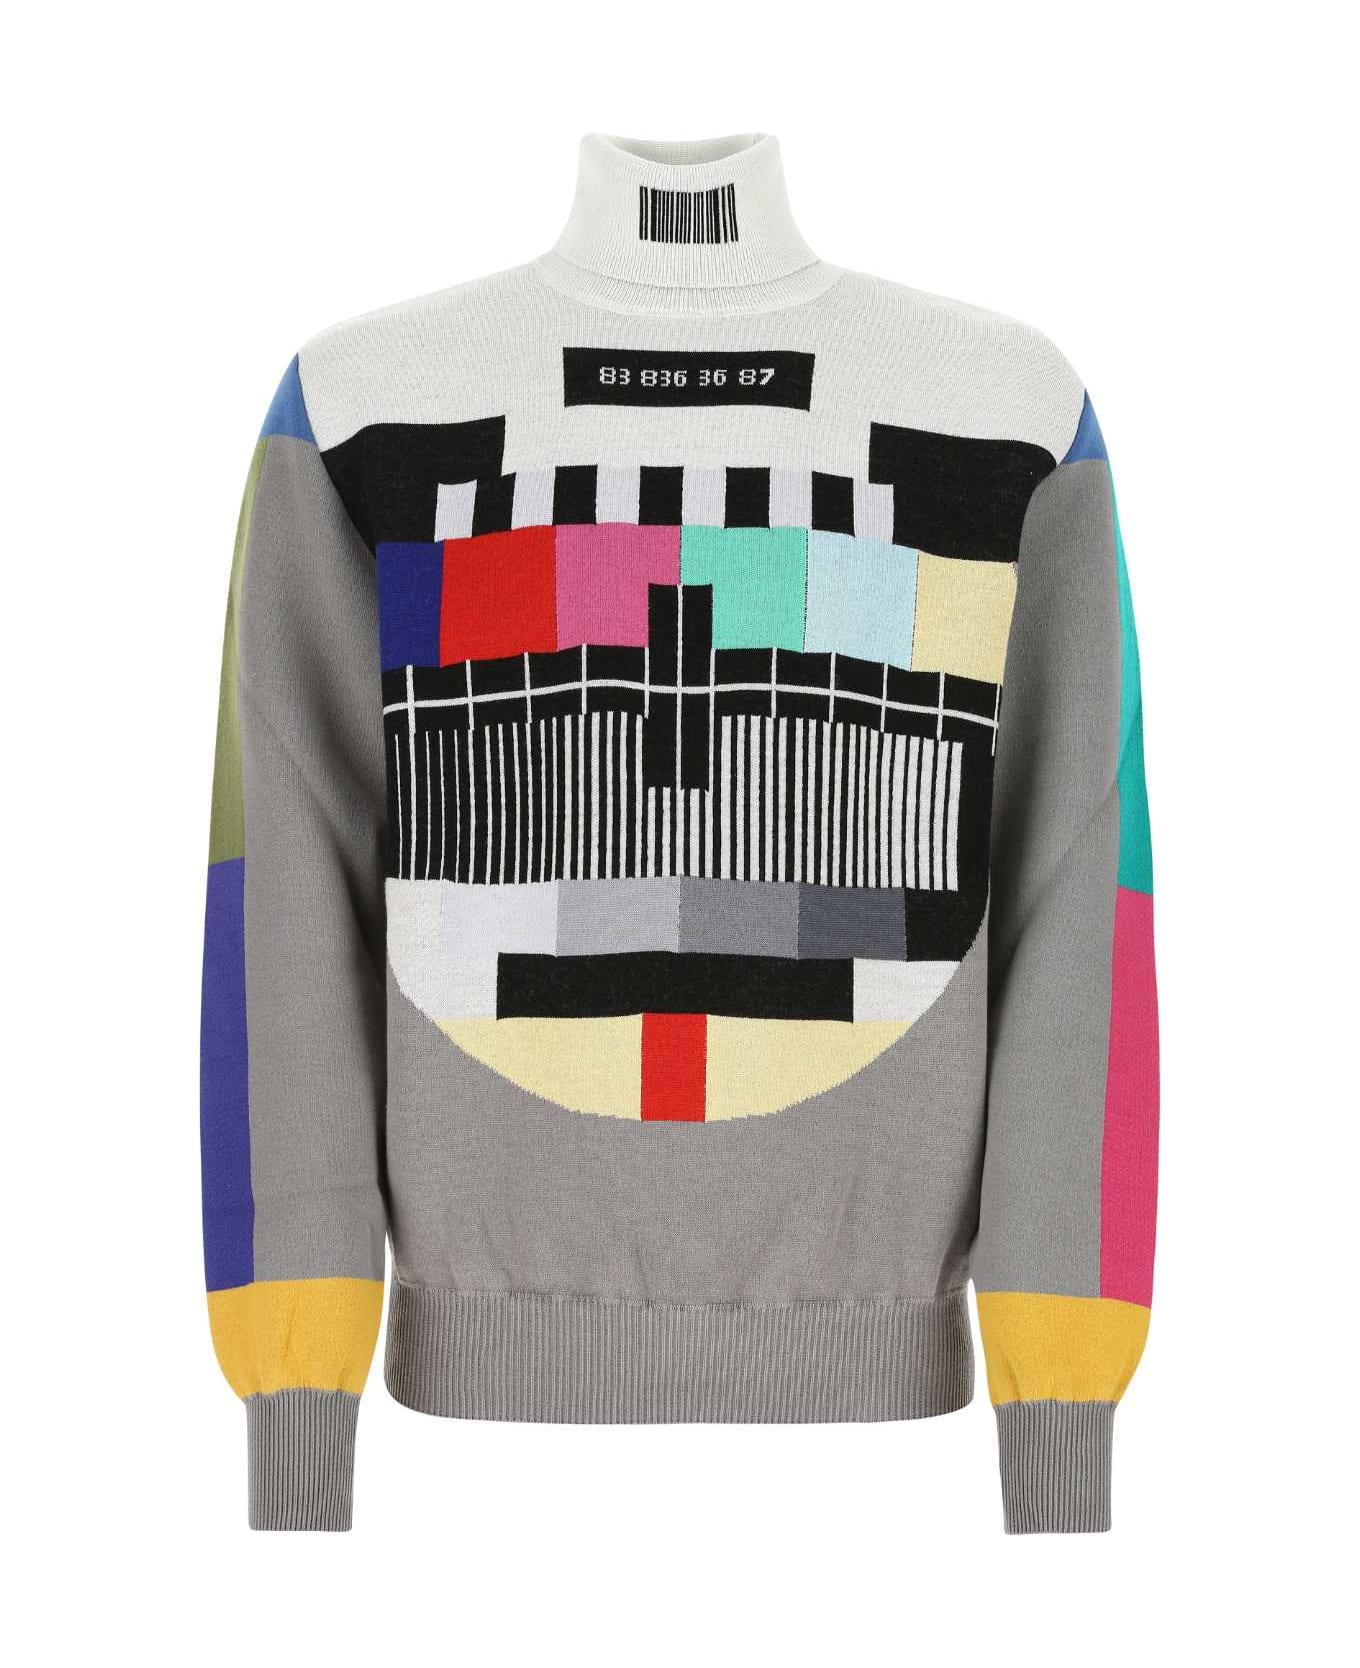 VTMNTS Embroidered Wool Blend Sweater - MULTICOLOUR ニットウェア